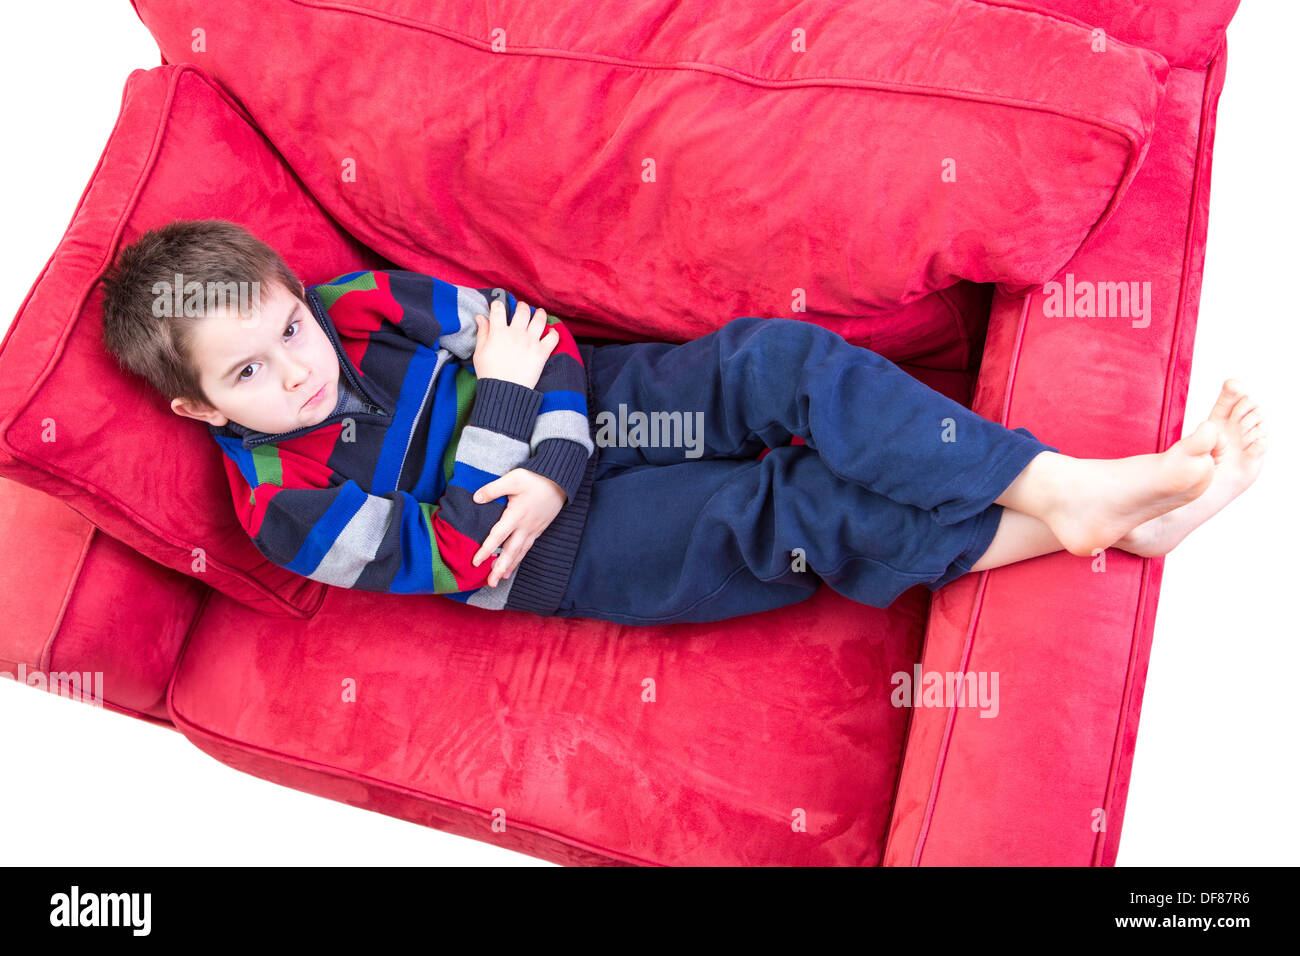 Eight years old boy expression mischievousness with arms closed on the couch by looking up in to your eyes, isolated on white Stock Photo